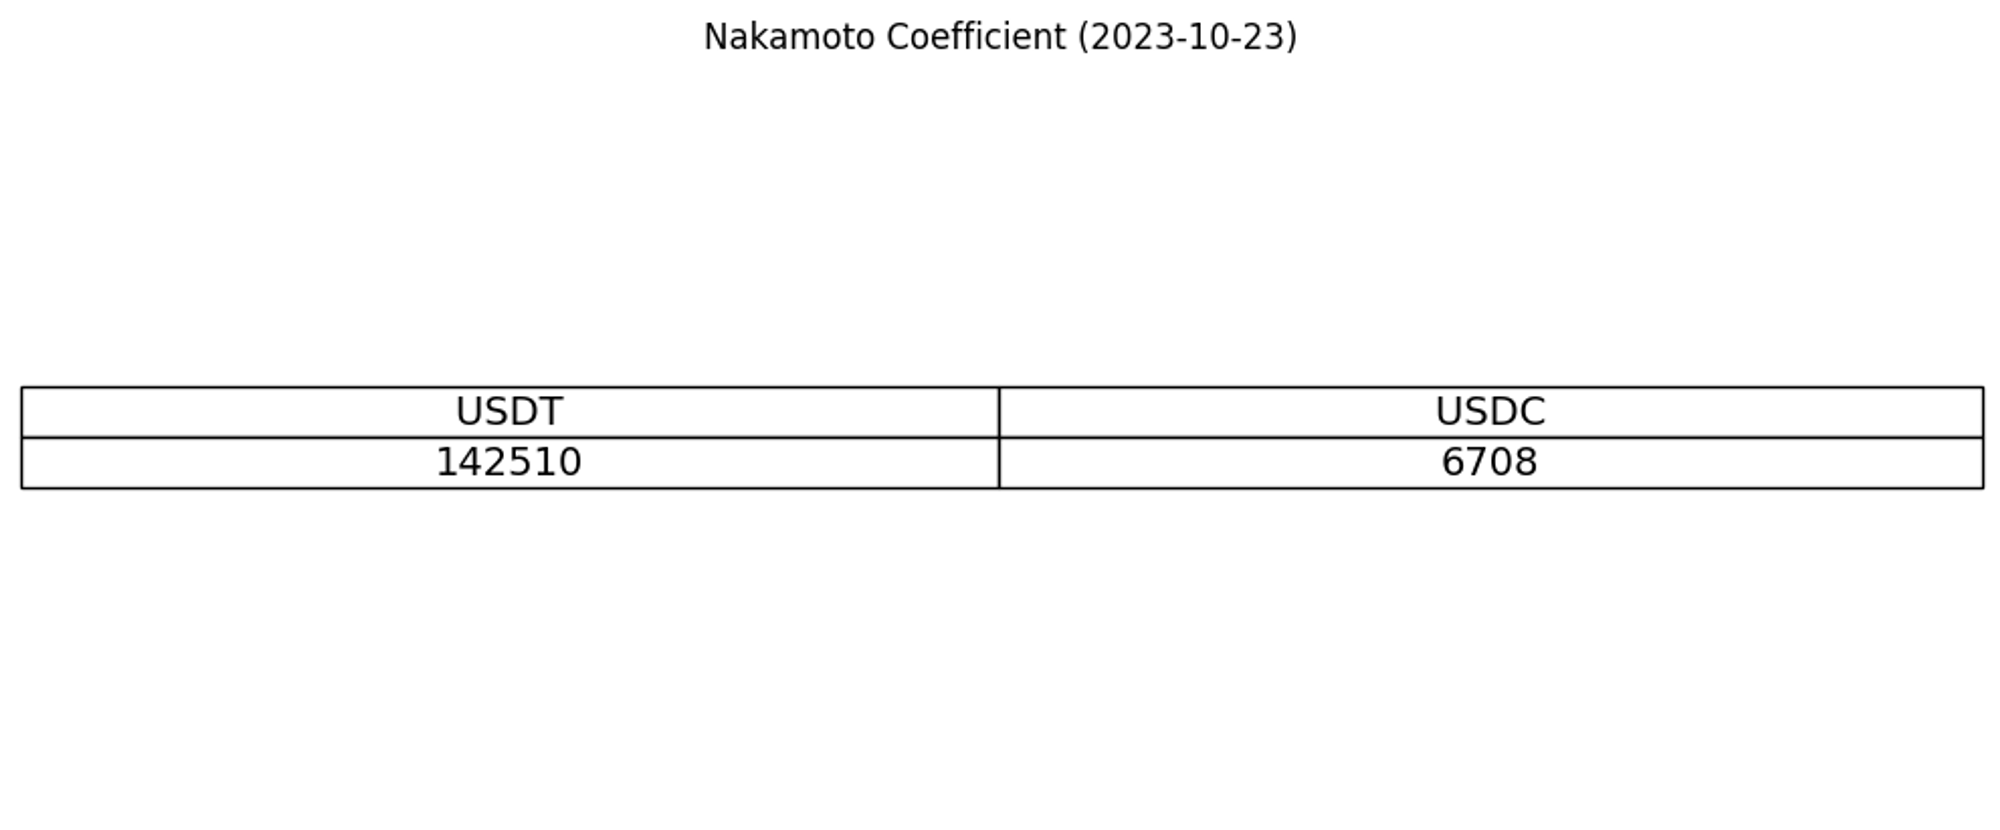 Nakamoto coefficient for USDC and USDT